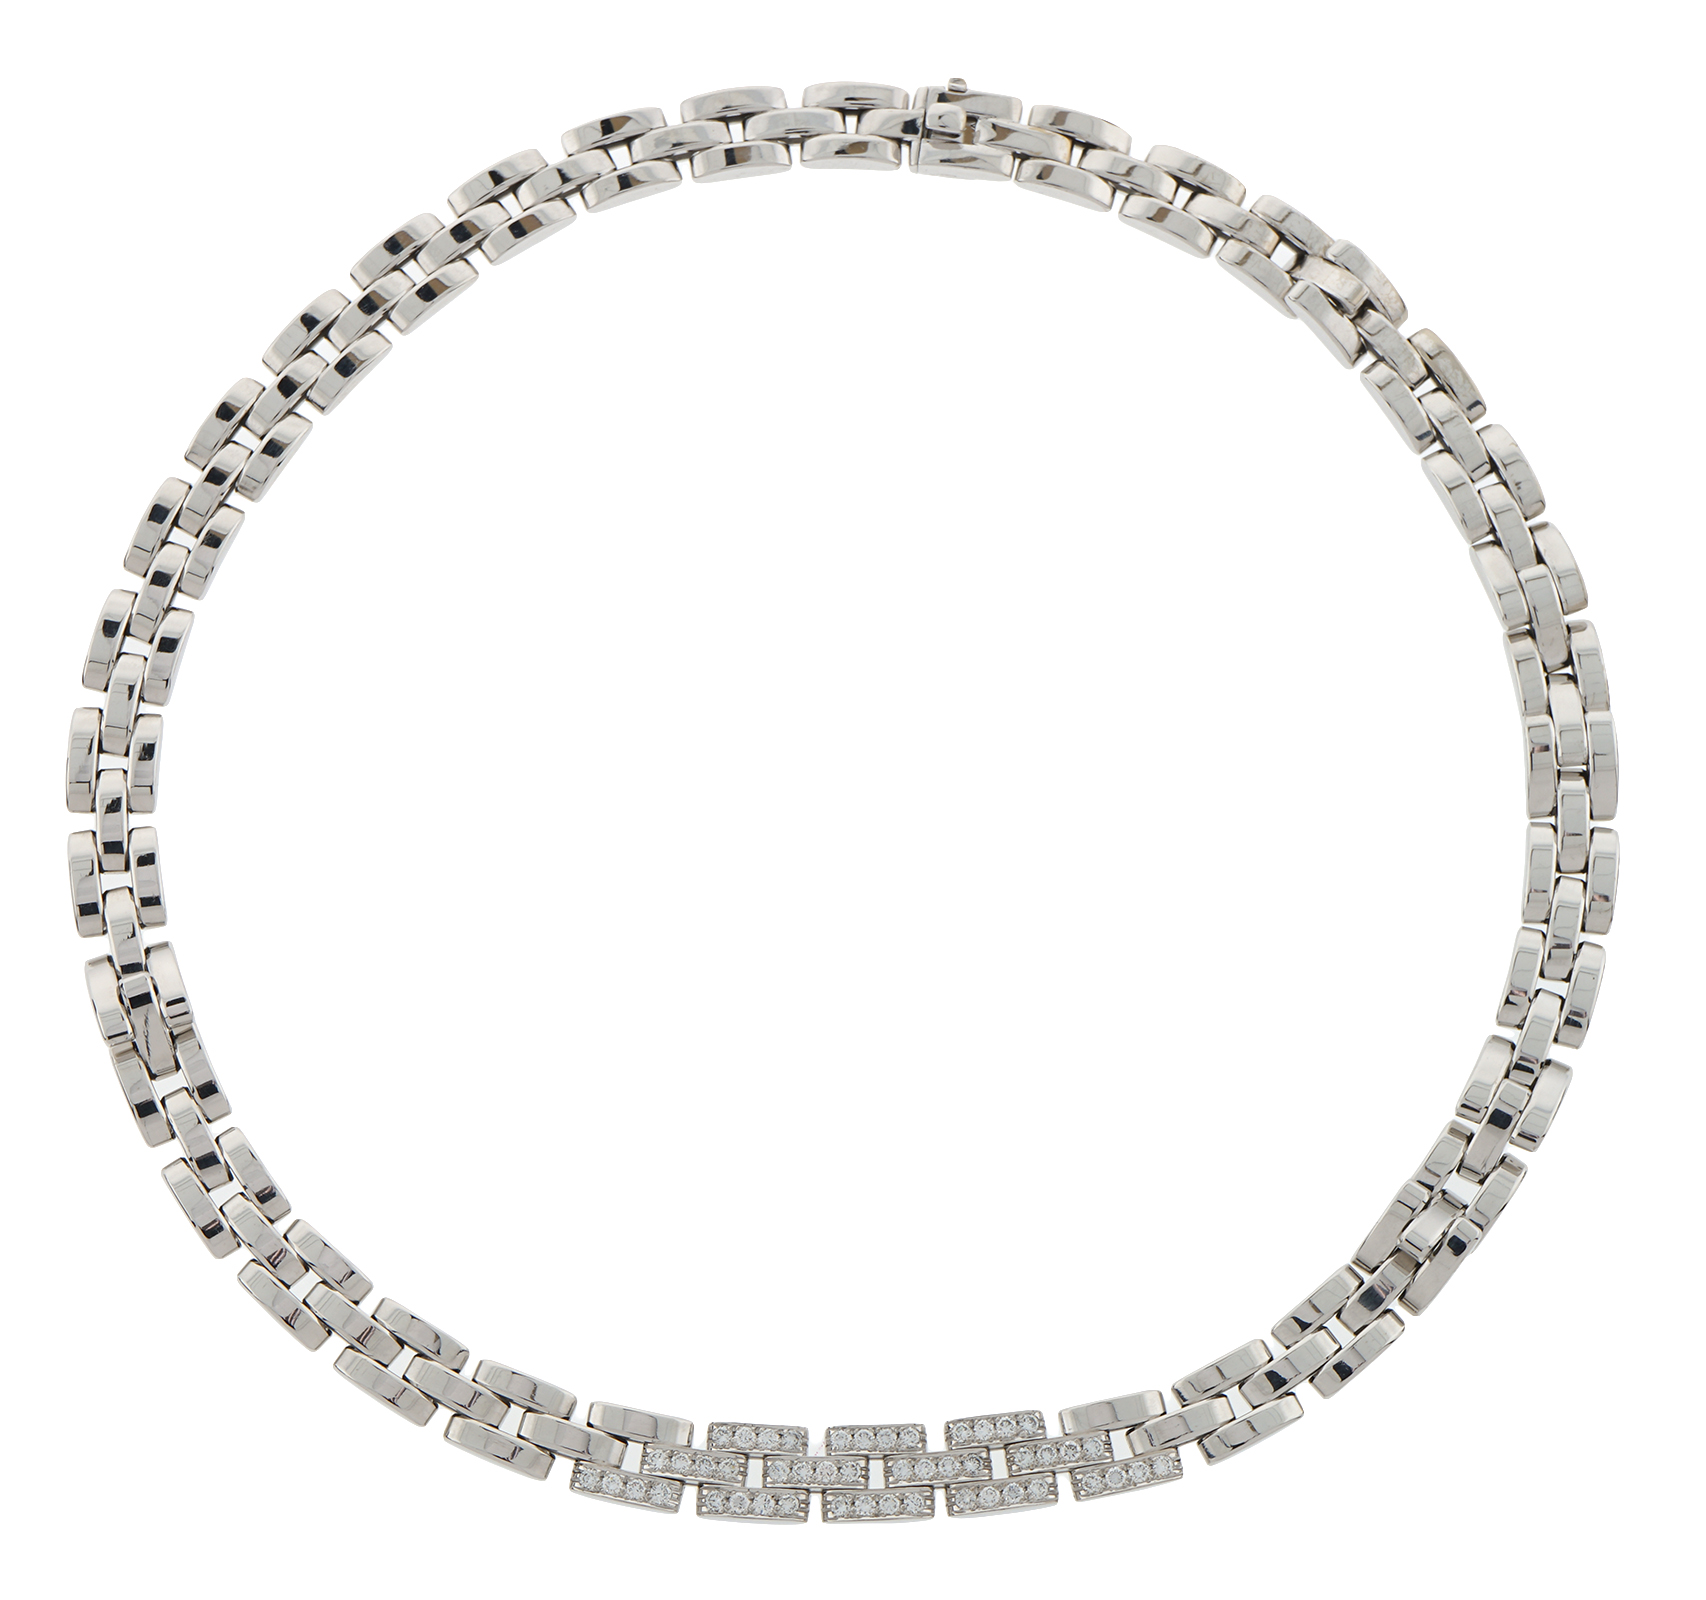 cartier necklace with diamond